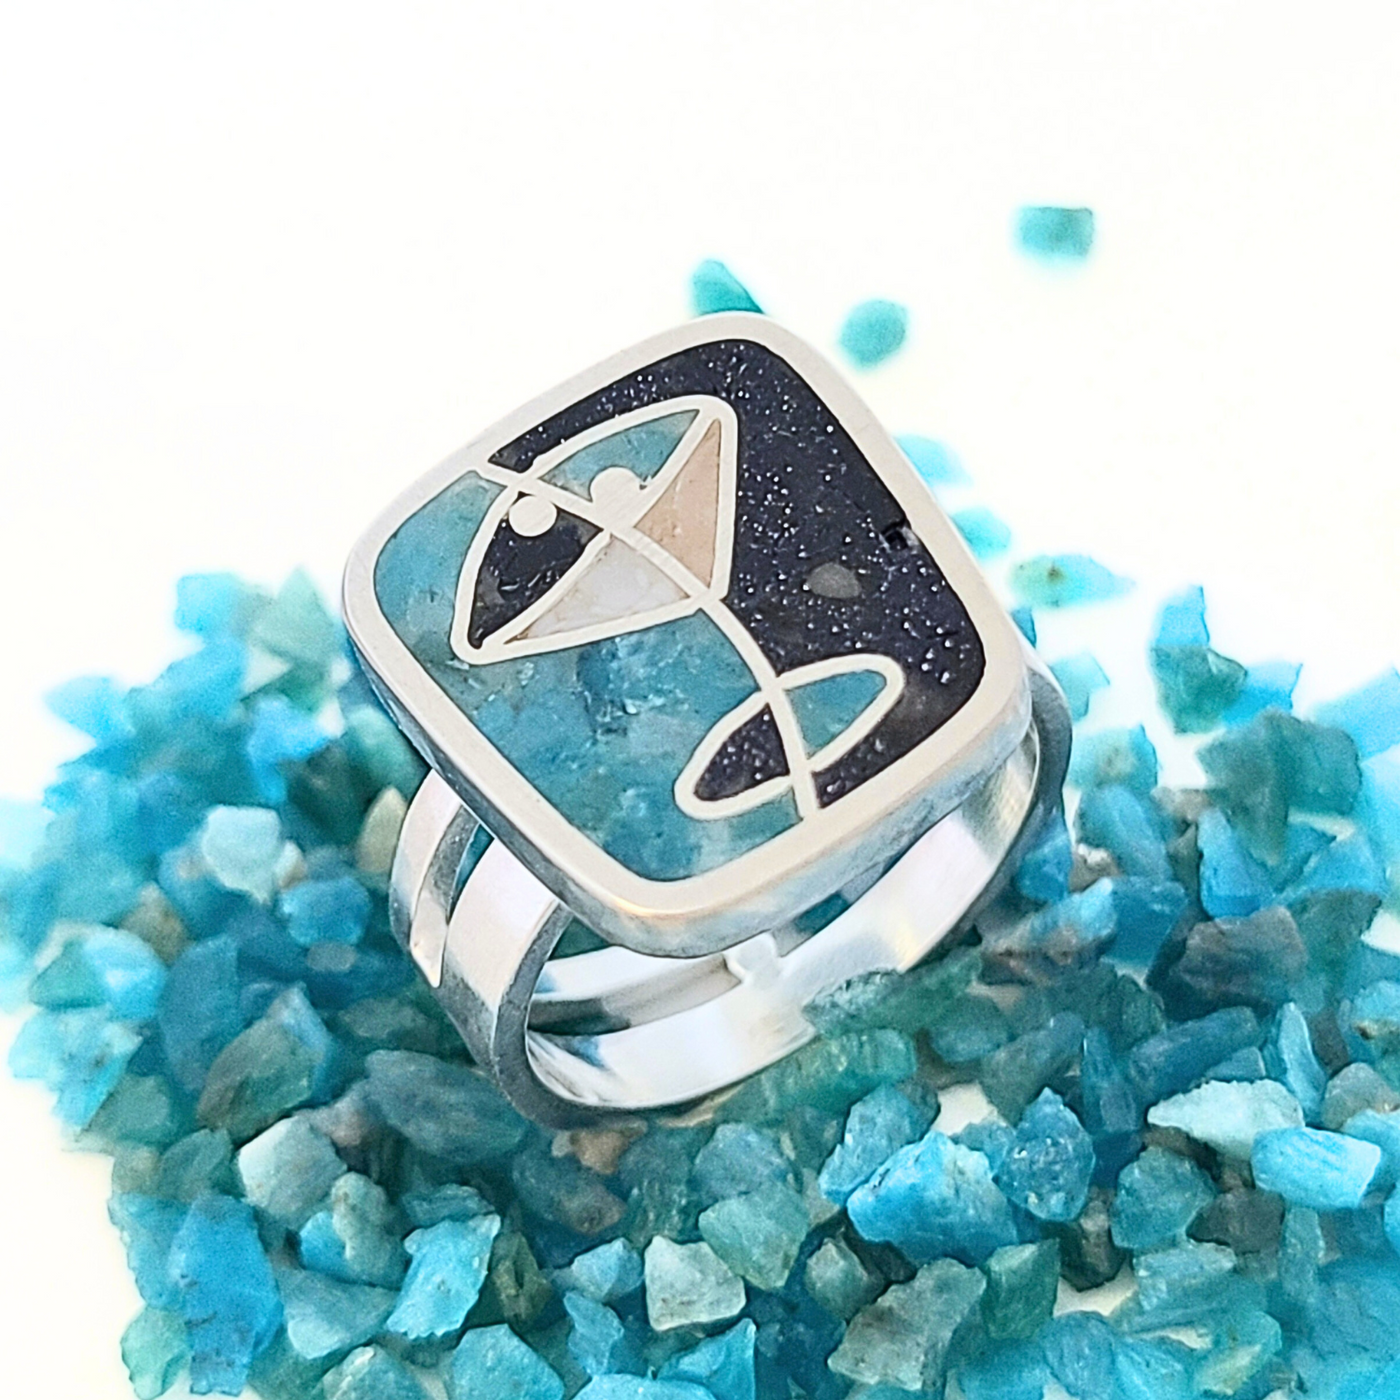 Inlay Cocktail ring with Julie Sanford May 4, 10am-5pm & May 5, 10am-1pm